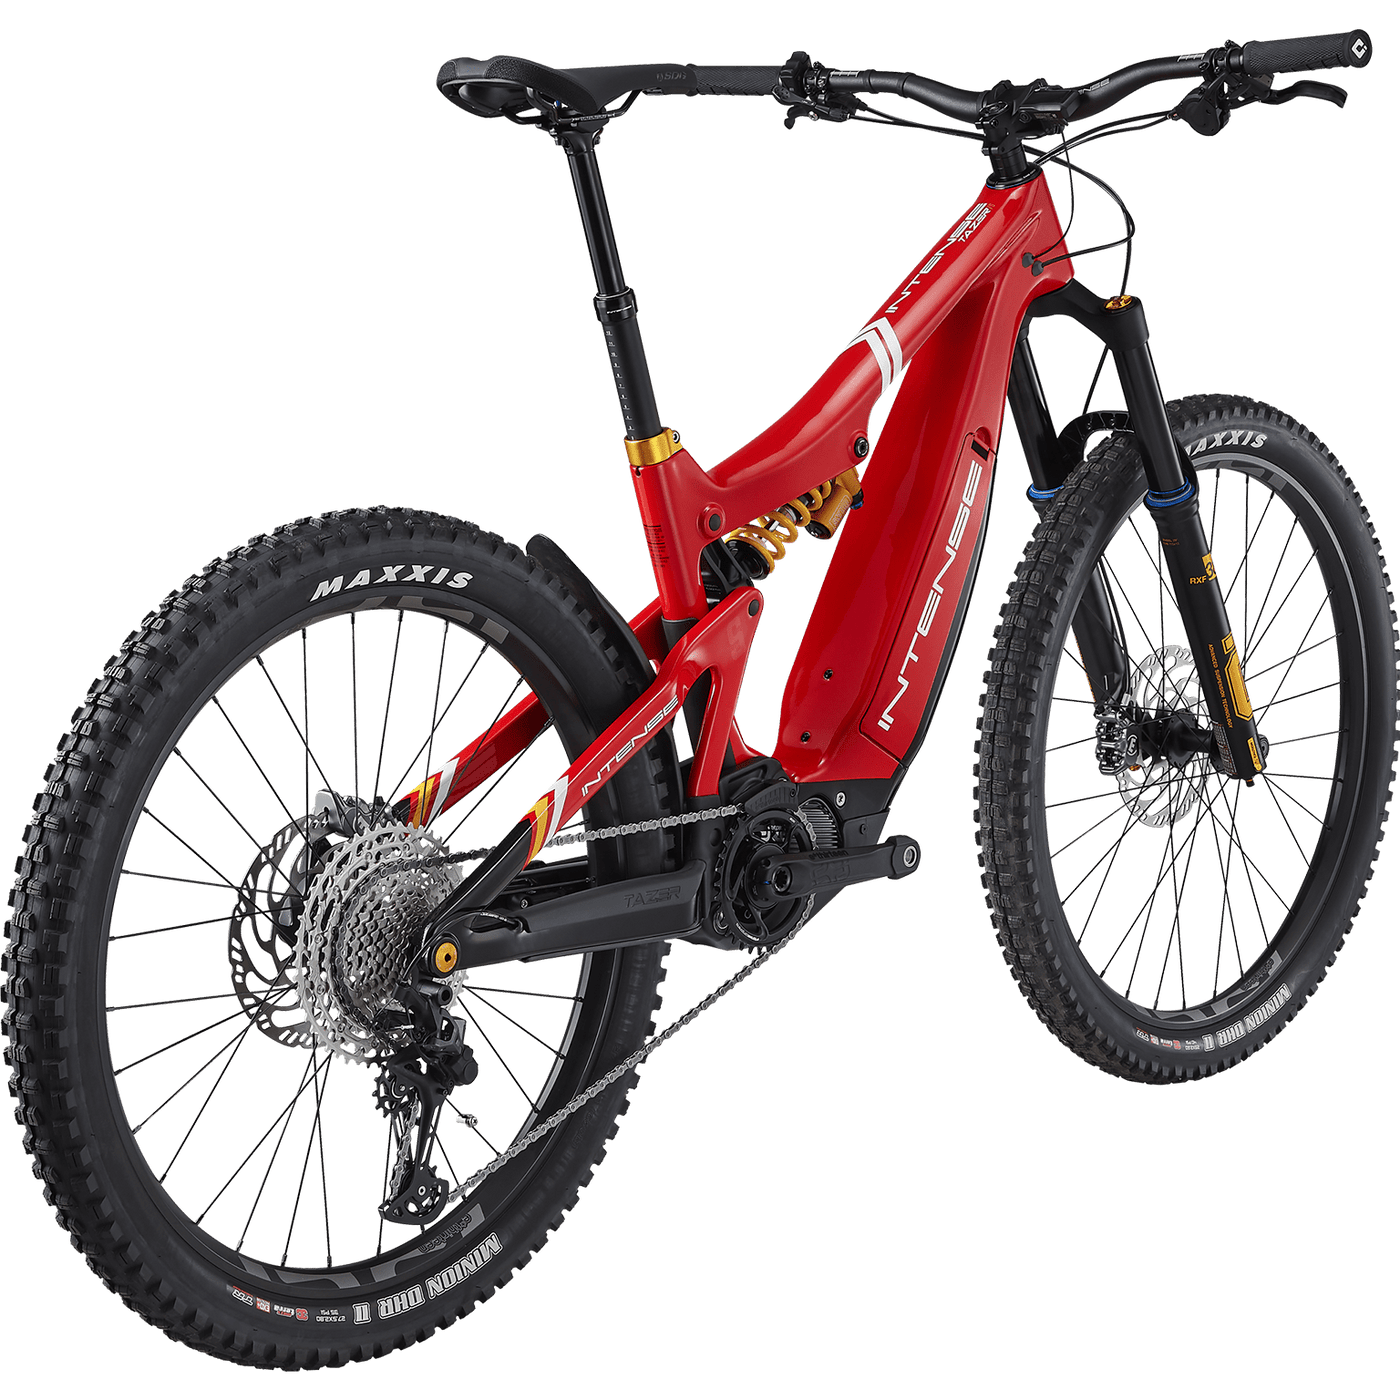 Shop online for the INTENSE Cycles Carbon Tazer S E-performance / E mountain bike for sale at intensecycles.com